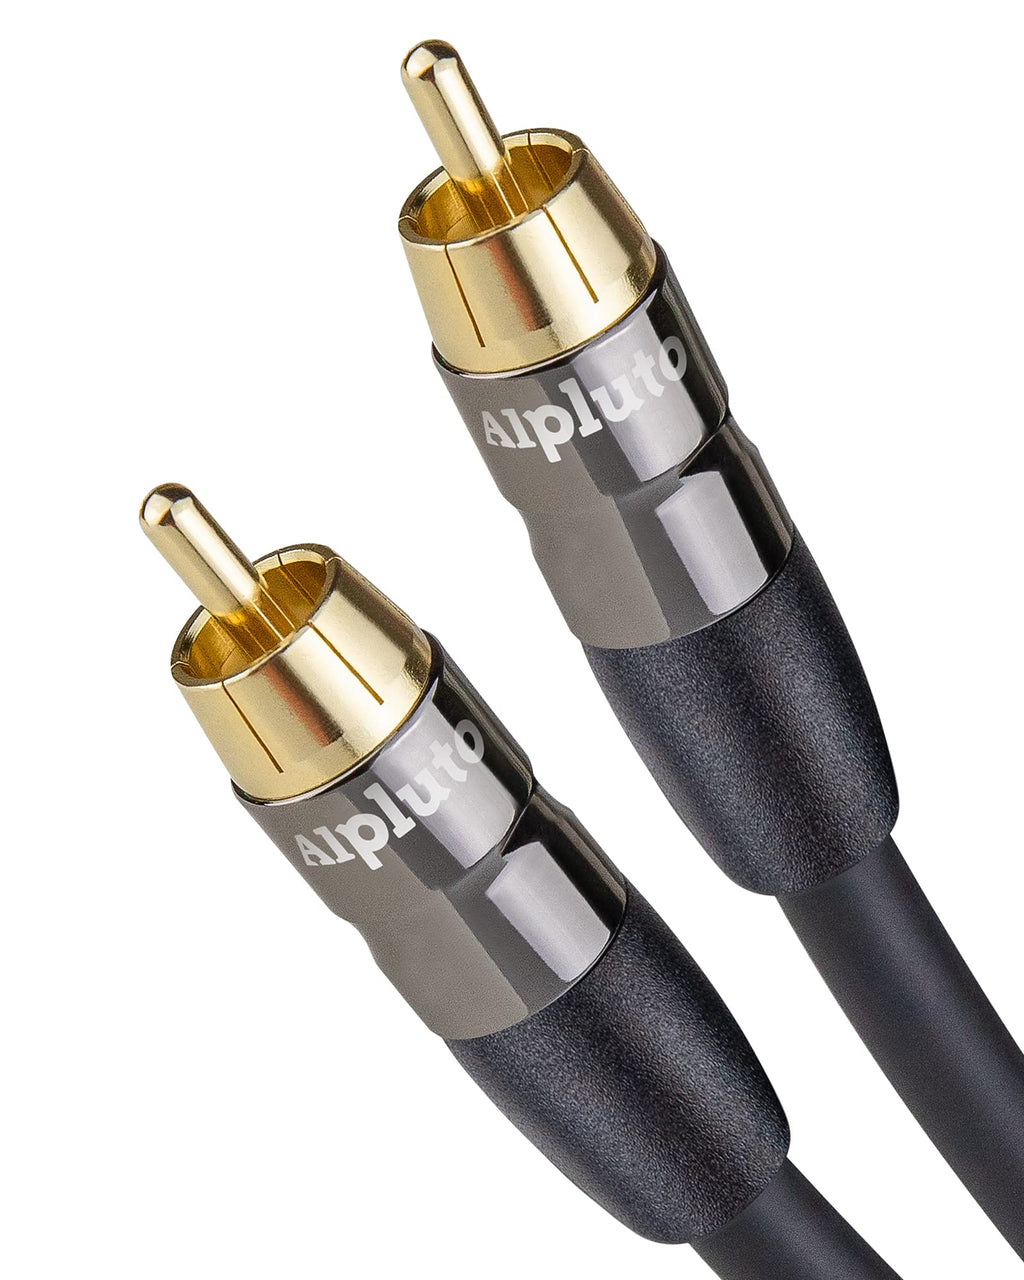 Alpluto Subwoofer Cable (20ft), RCA to RCA Audio Cable,Subwoofer Cable Dual Shielded with Gold Plated RCA to RCA Connectors-Black - LeoForward Australia